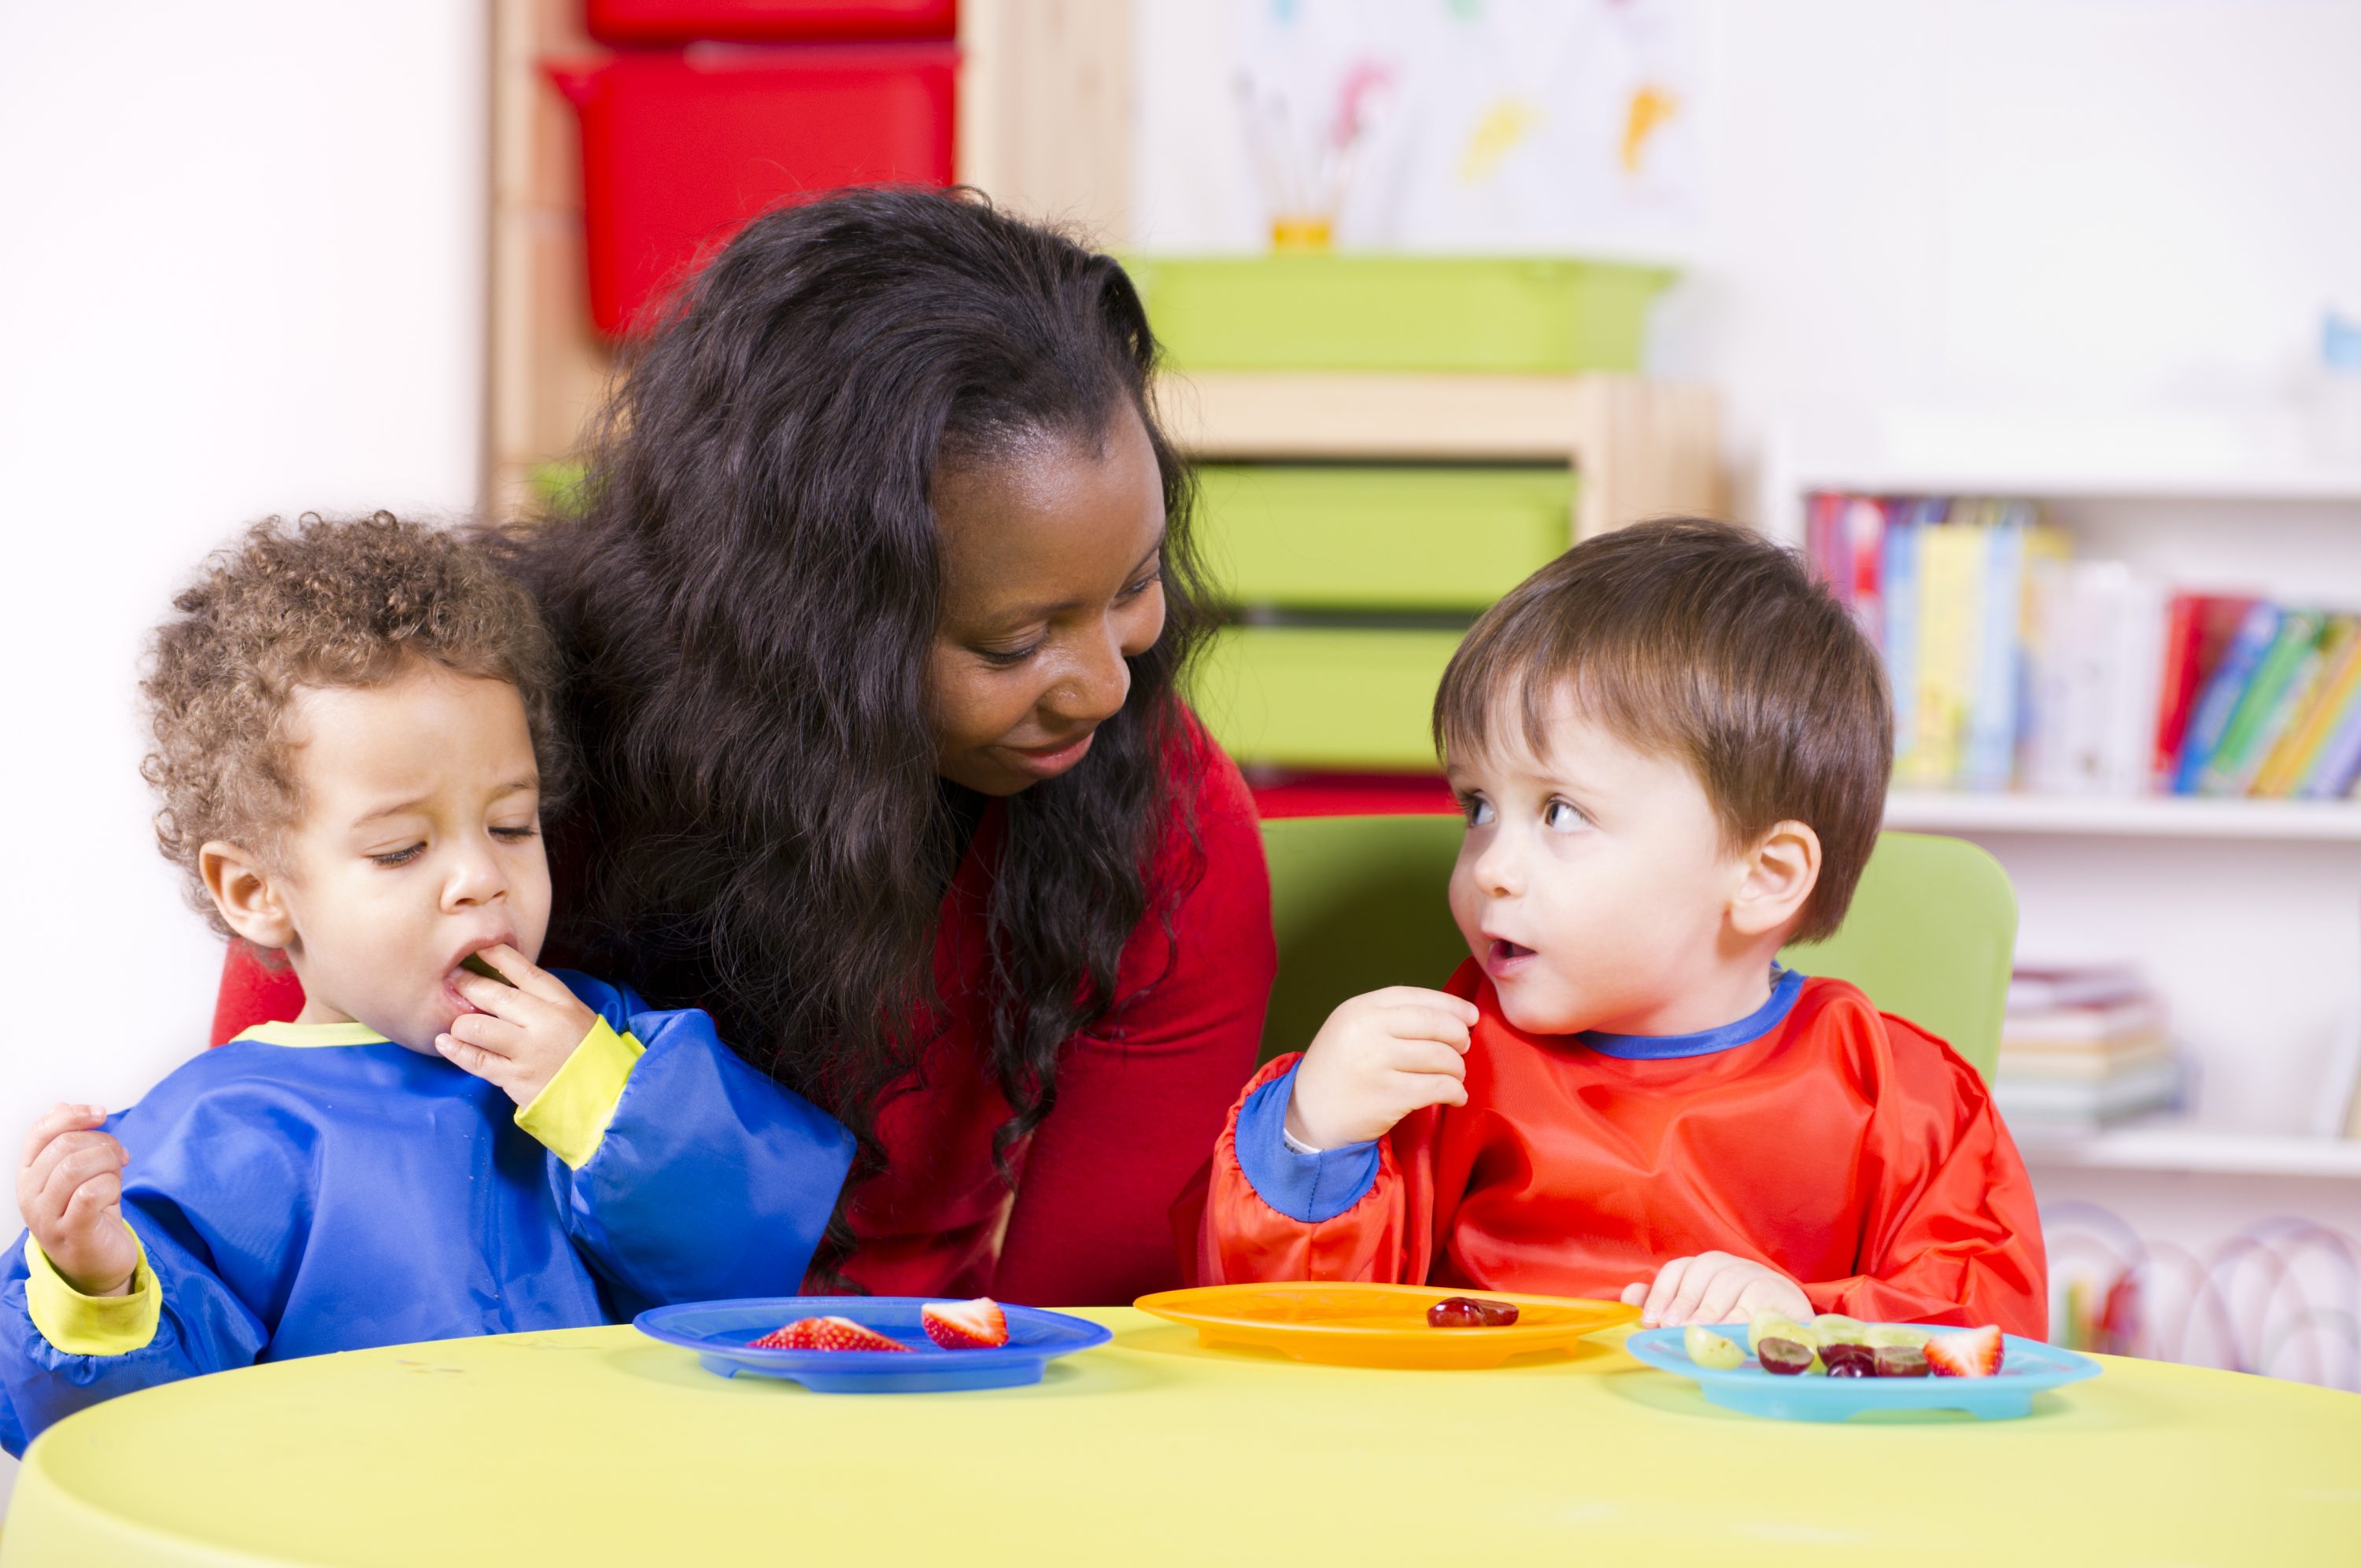 African American educator seated at table with two preschool aged children eating fruit